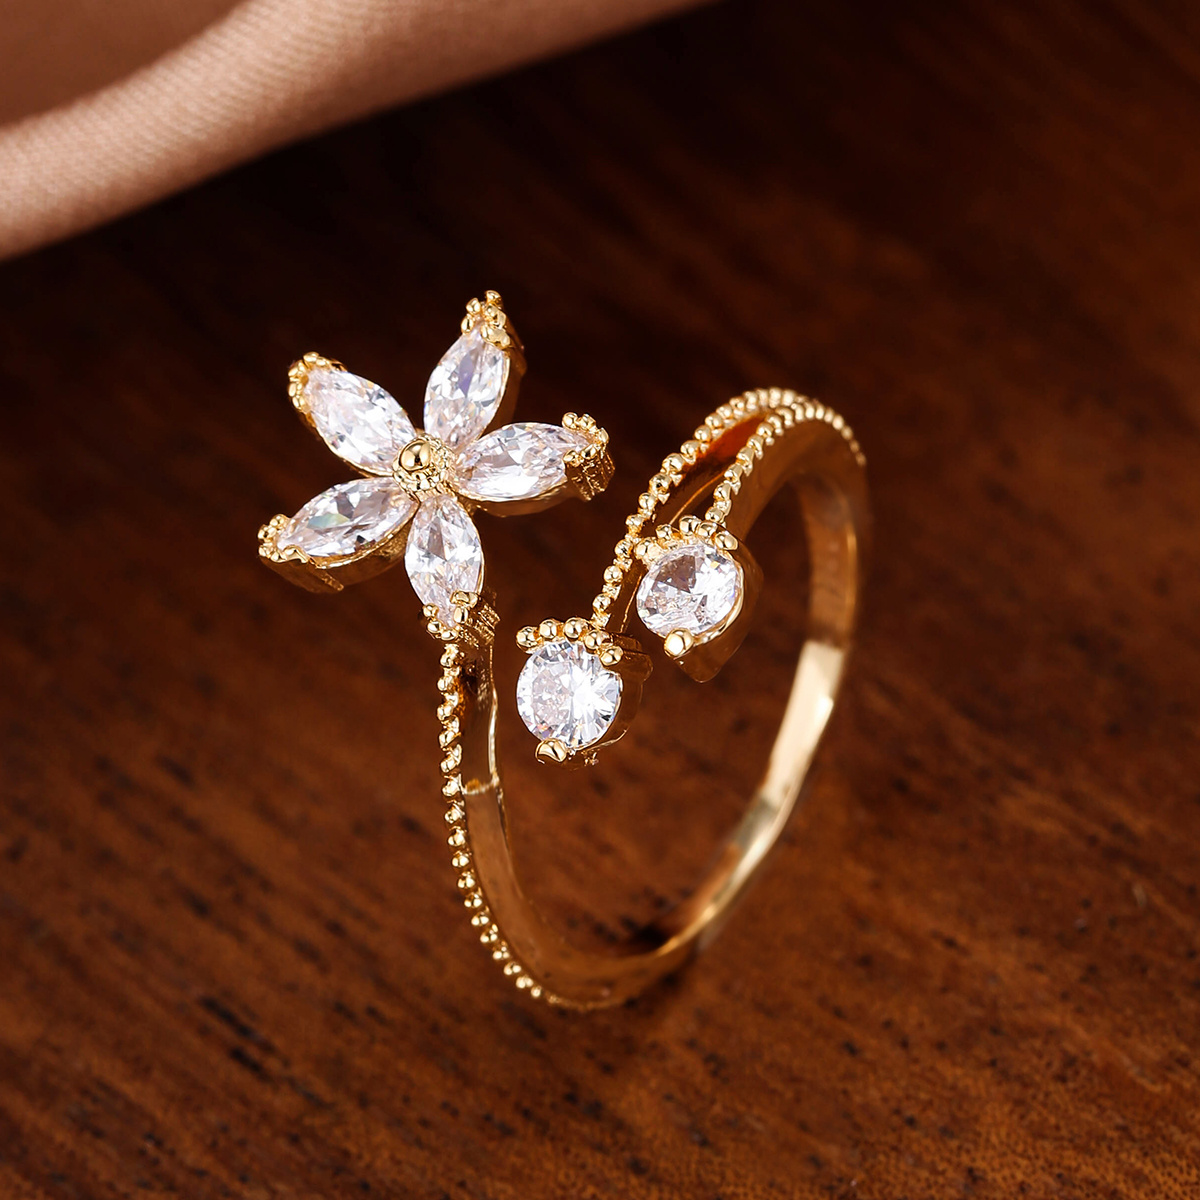 

Elegant Copper Flower Shape Ring Jewelry For Women Female Simple Rhinestone Casual Ring On Finger Index Accessorise